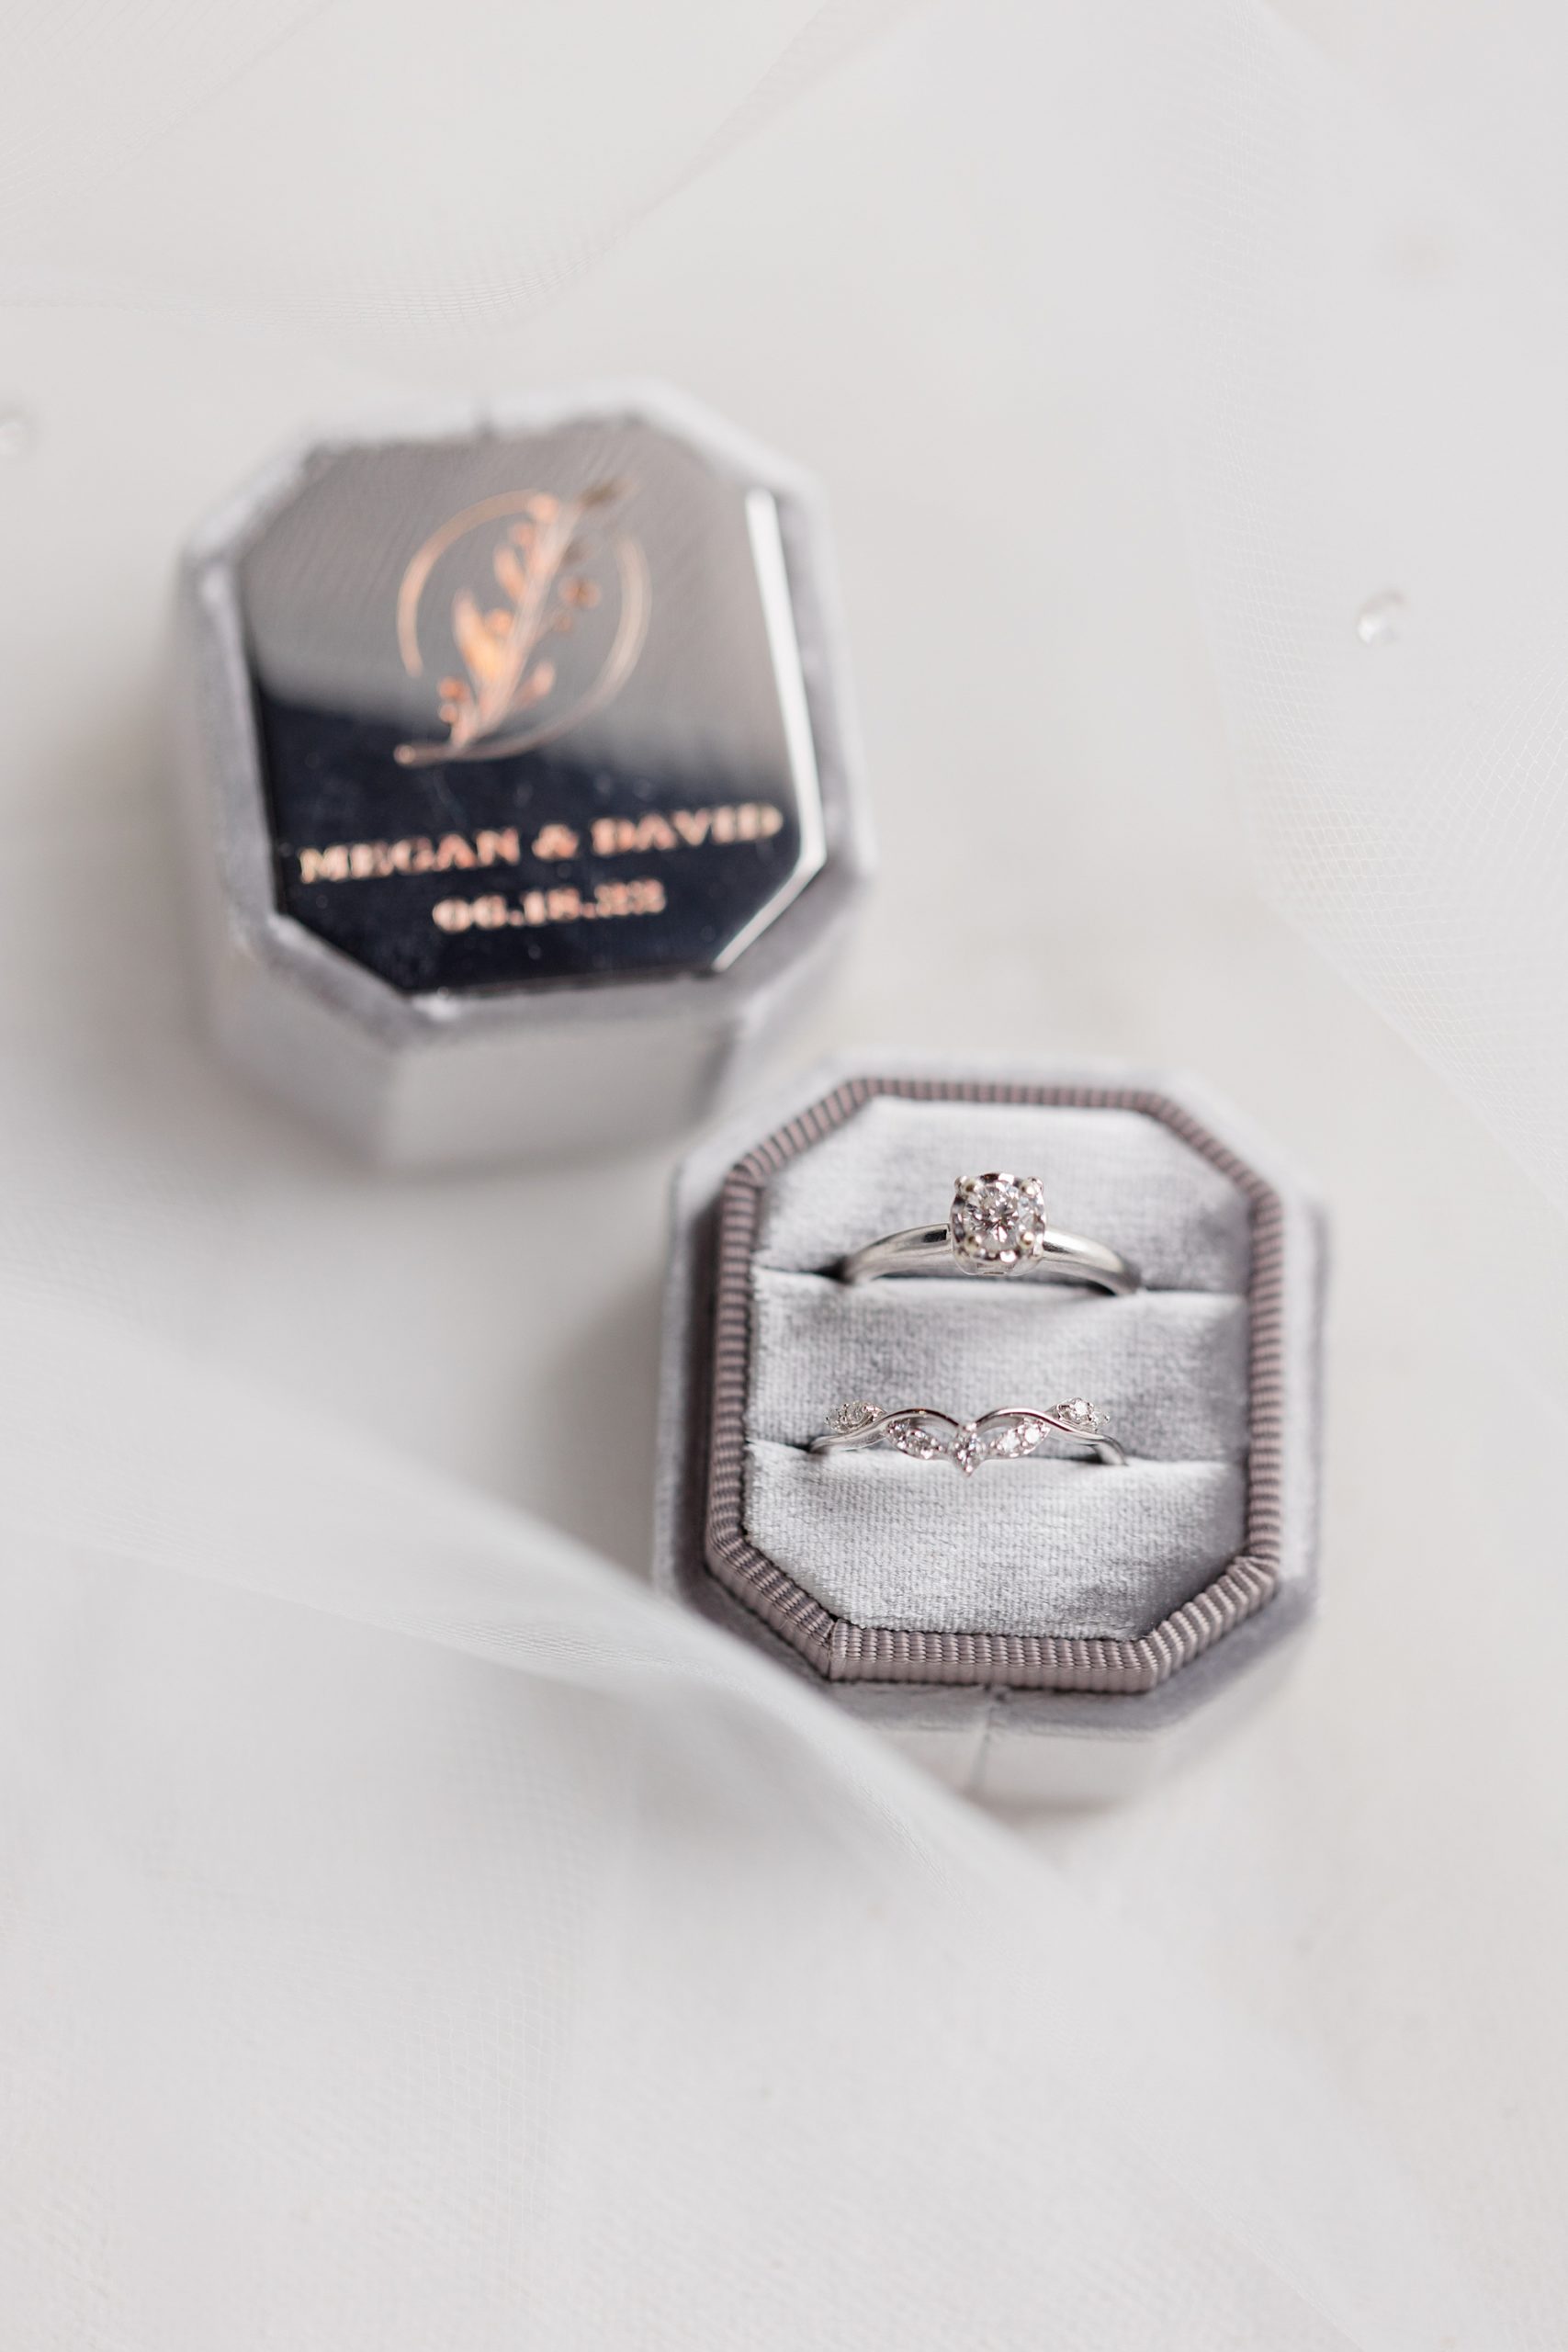 wedding bands rest in silver ring box